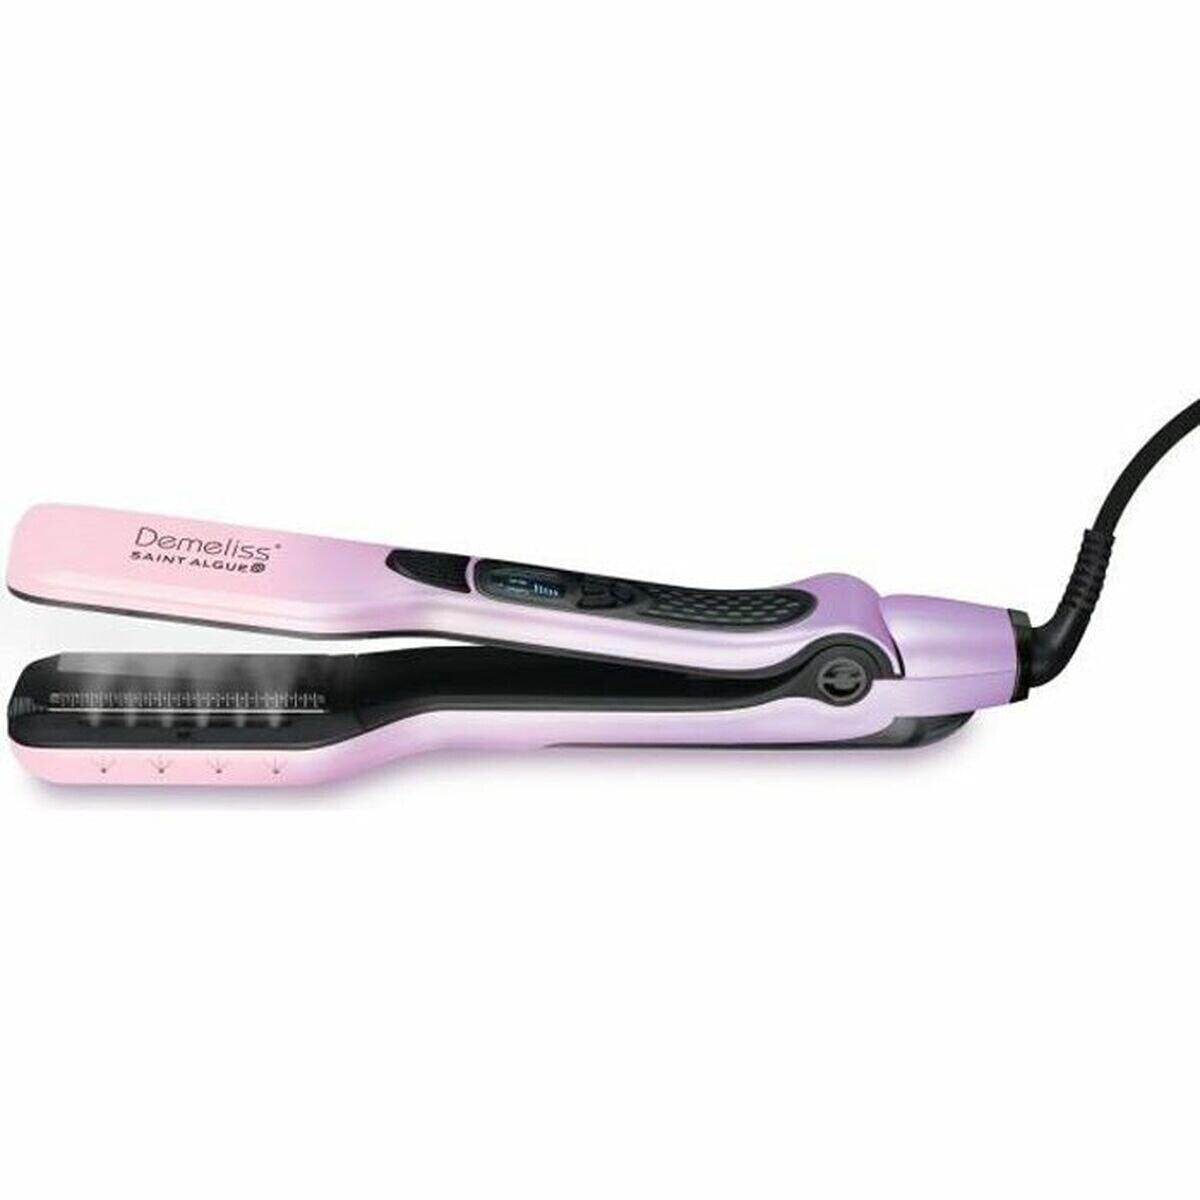 Ceramic hair straighteners with steam фото 77